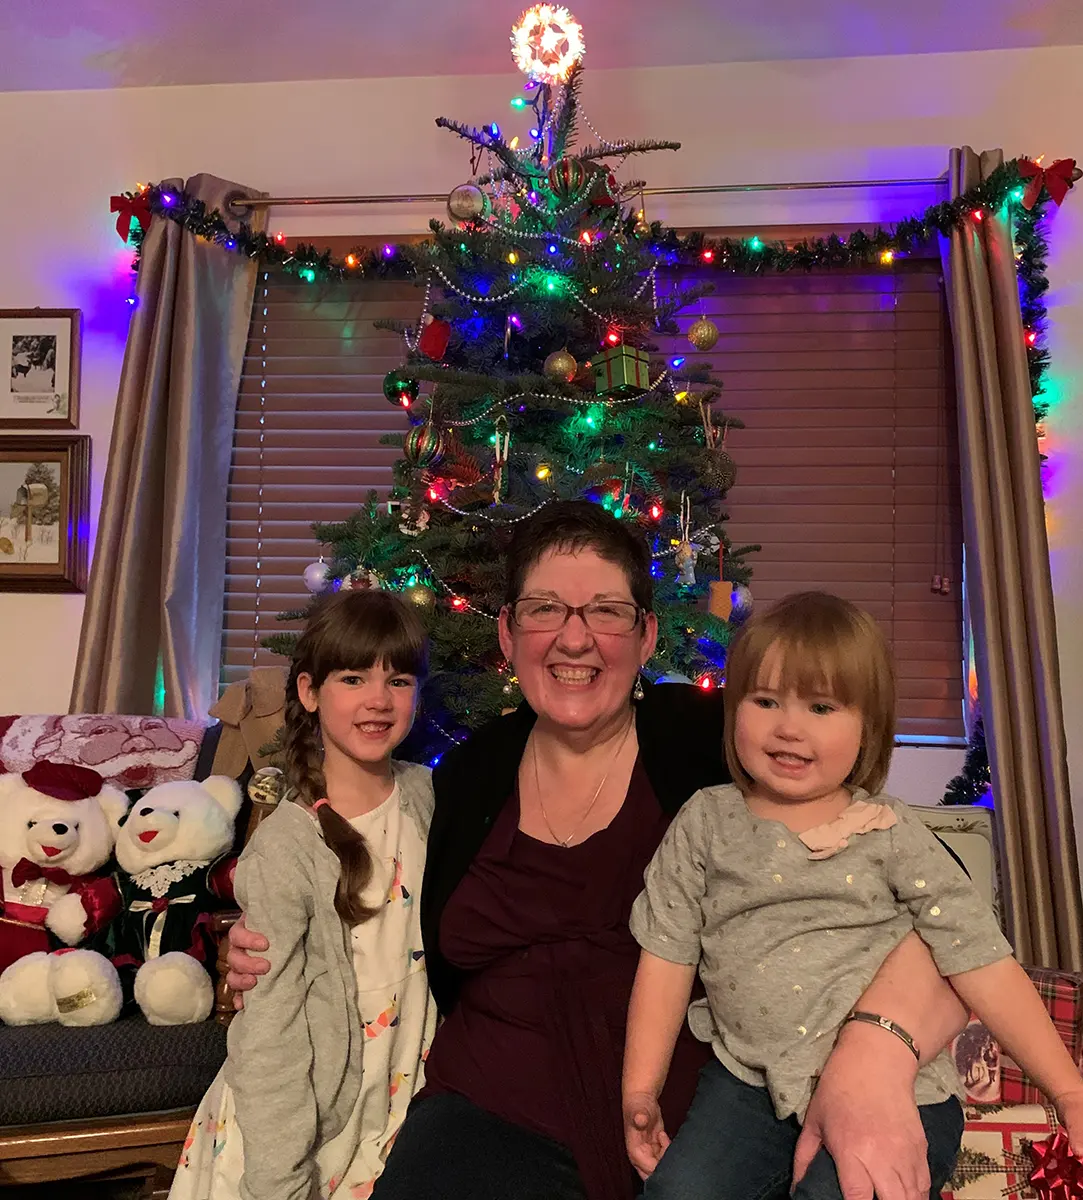 photo of a grandmother and two granddaughters sitting in front of a Christmas tree